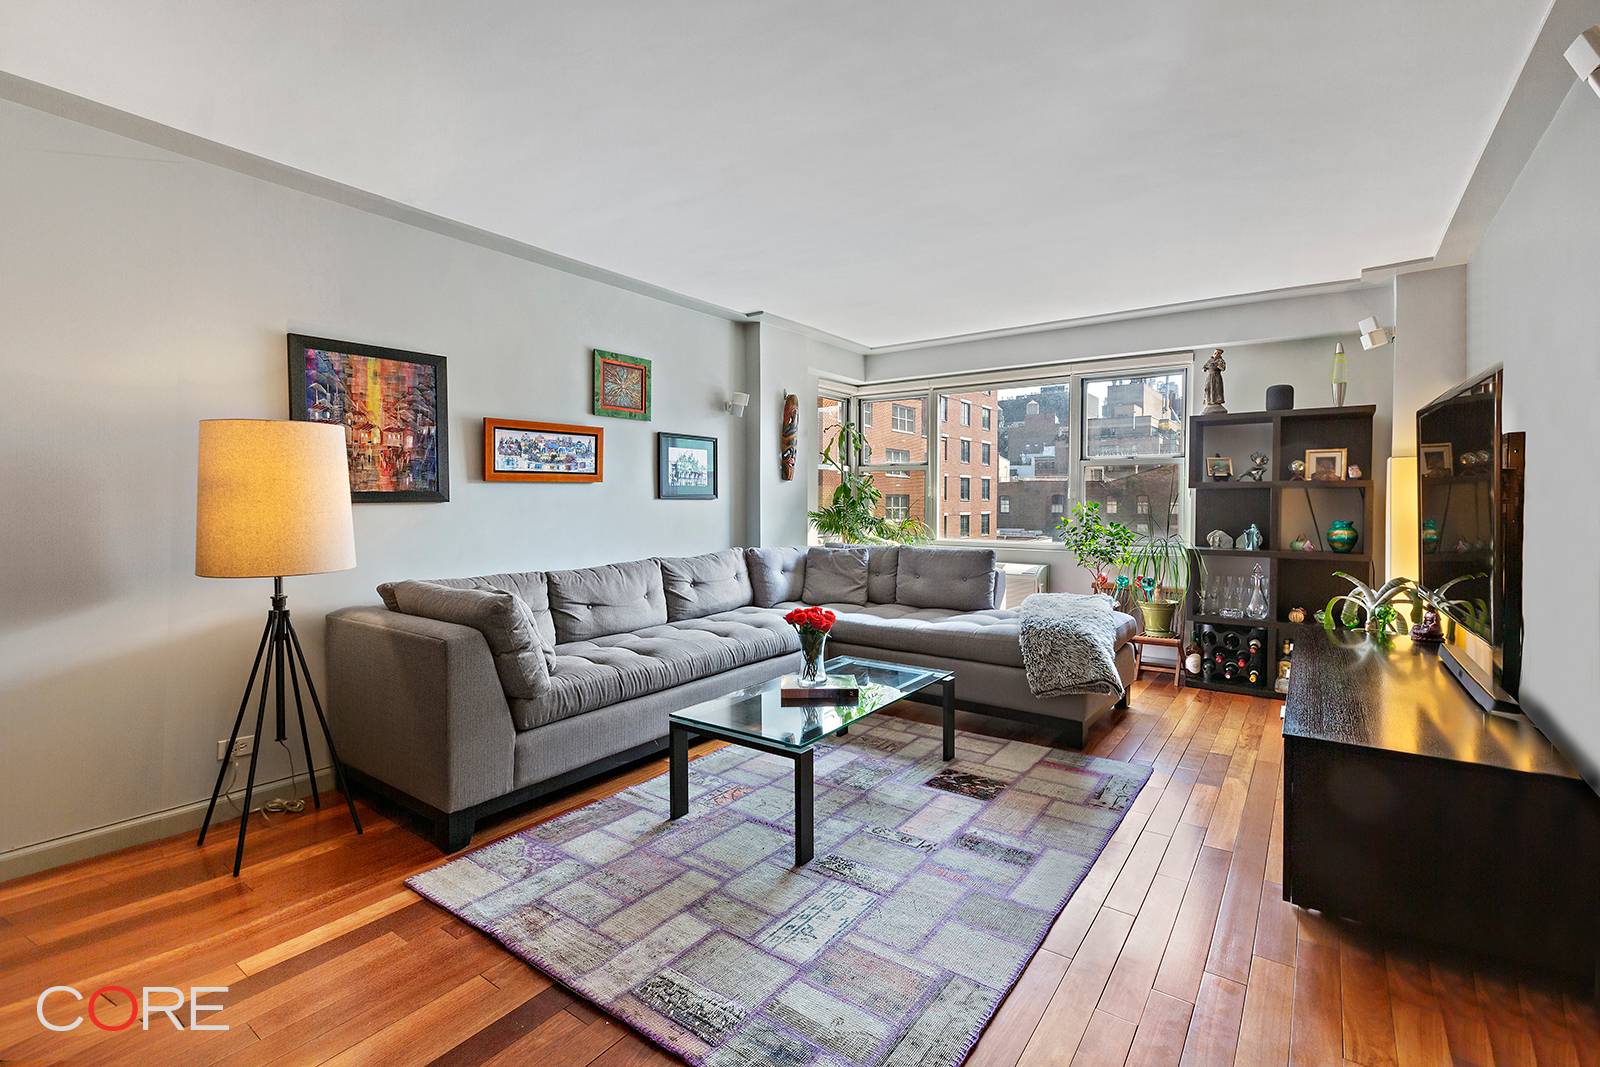 Idyllically located on coveted West 12th Street in prime Greenwich Village, this spacious, immaculately renovated high floor one bedroom is an absolute gem.